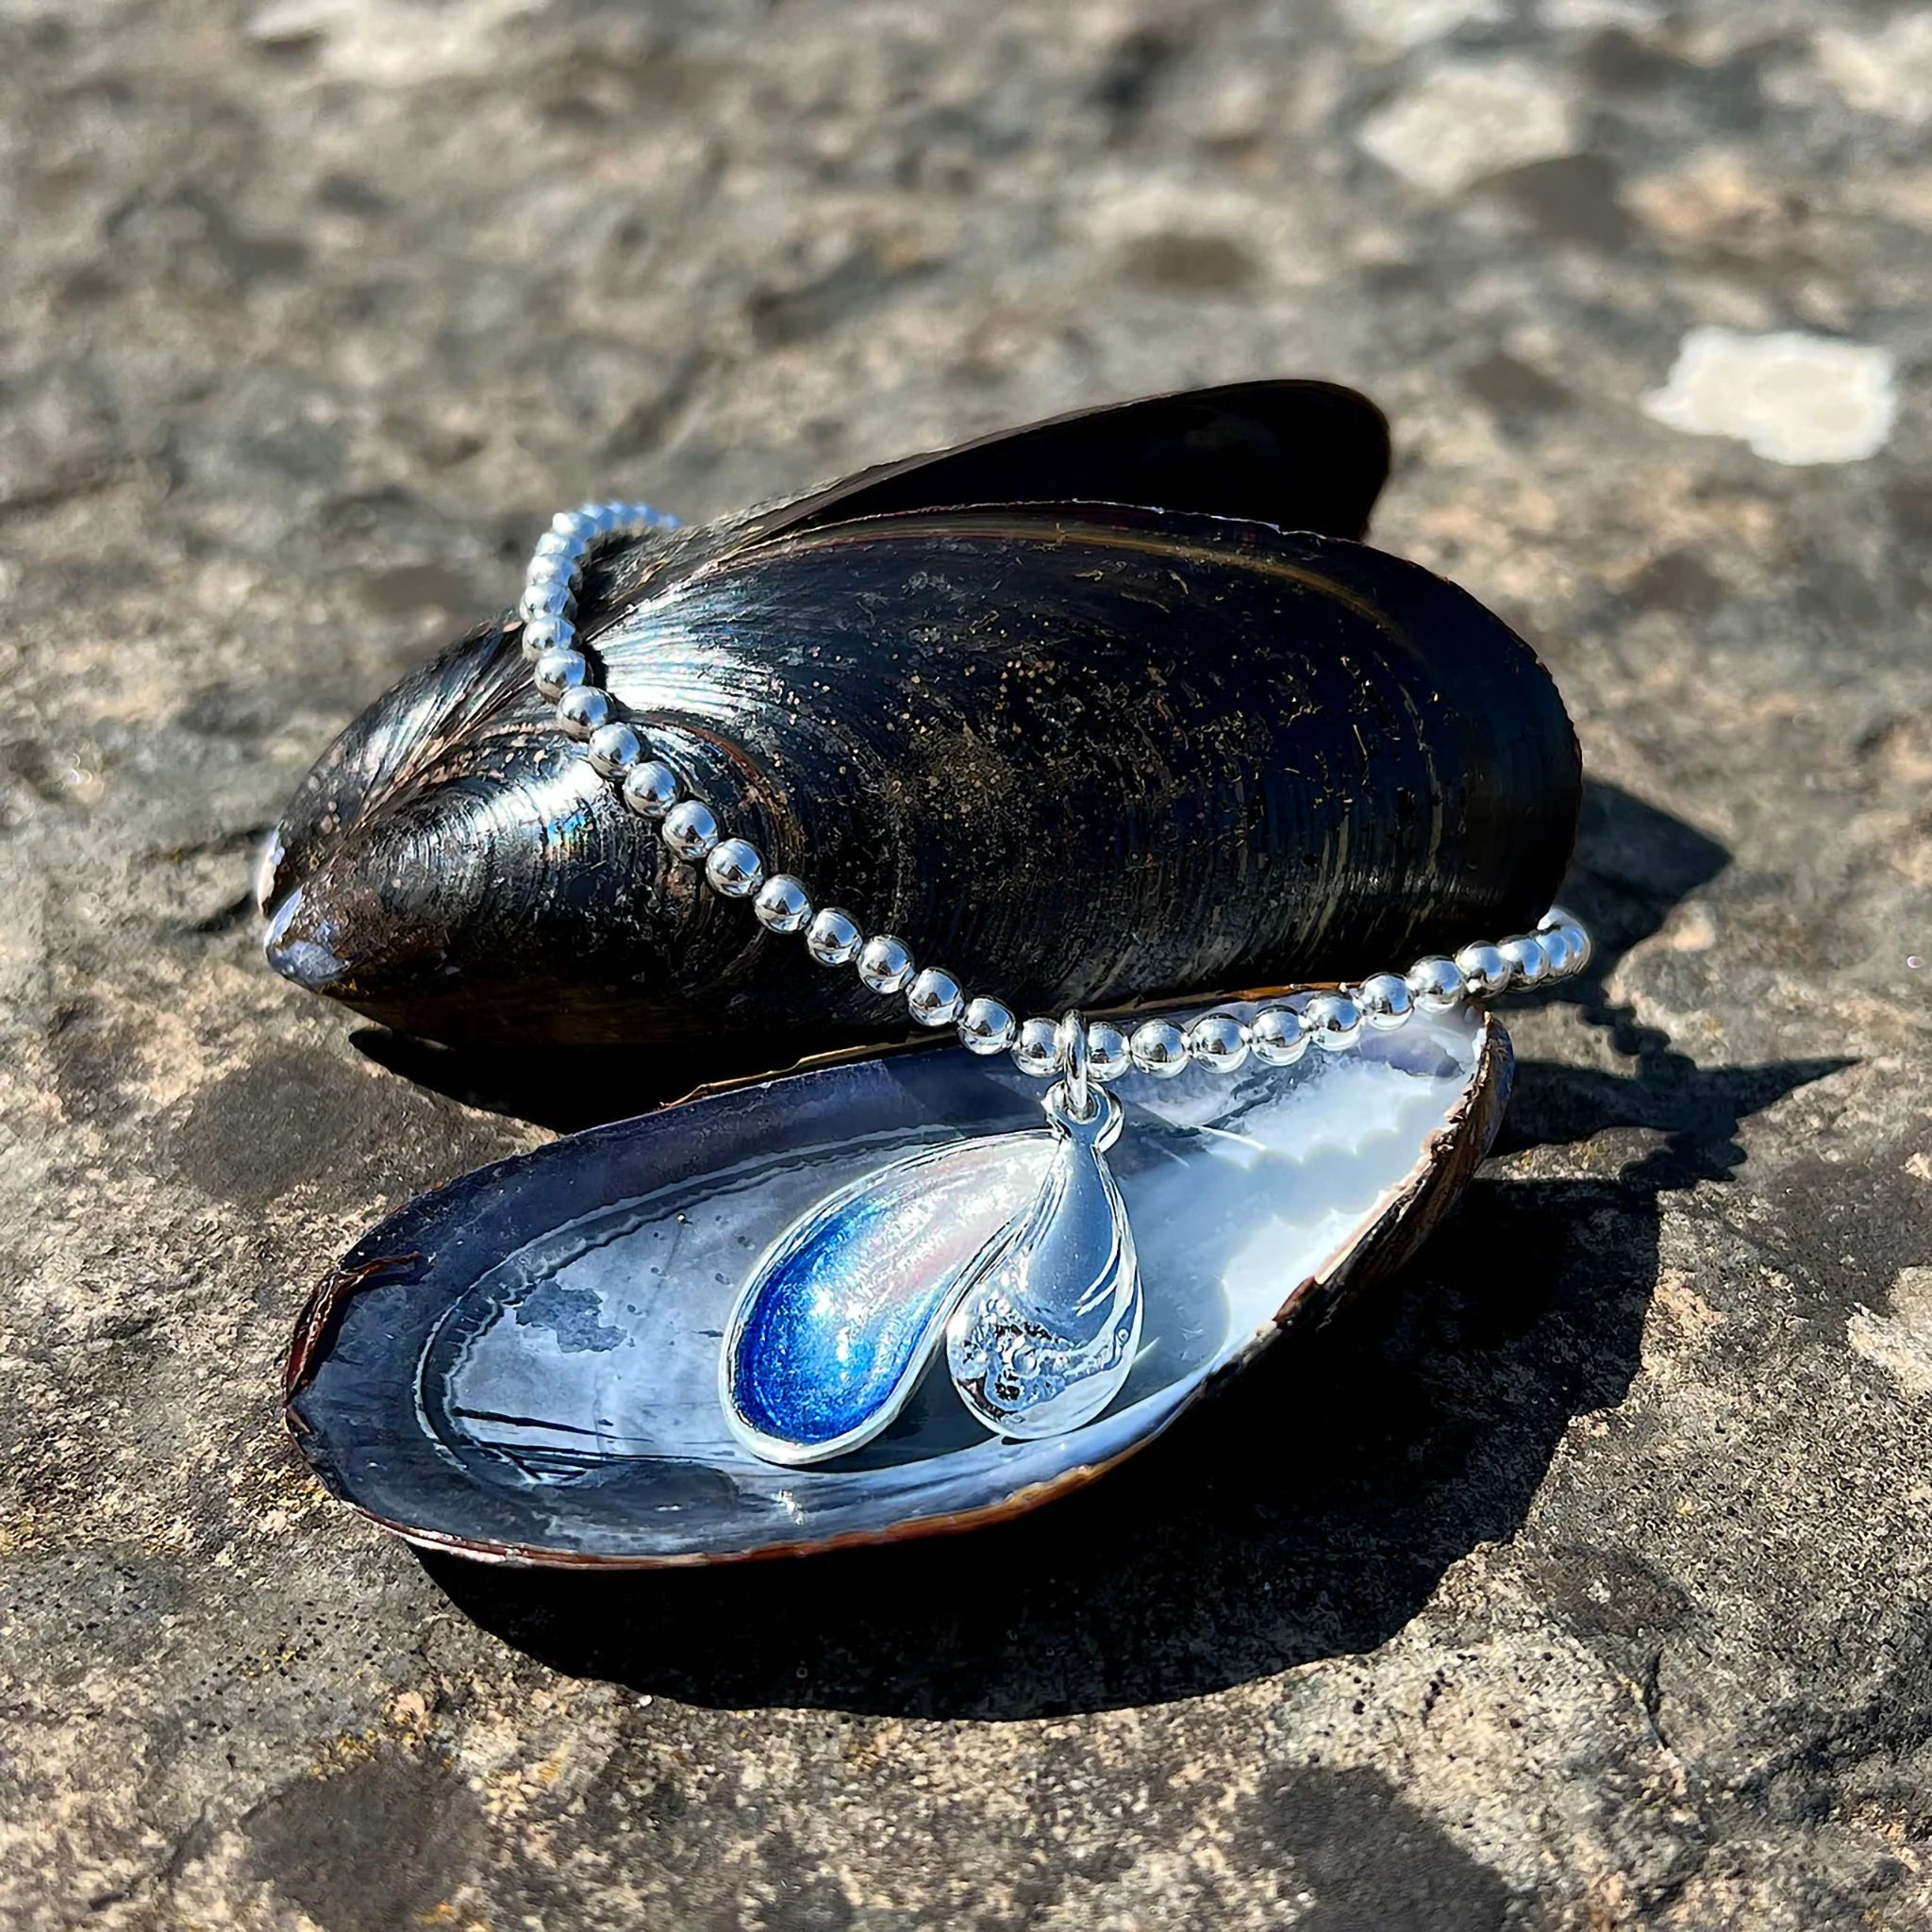 A silver beaded bracelet with a drop pendant in the shape of mussels in blue enamel lifestyle image